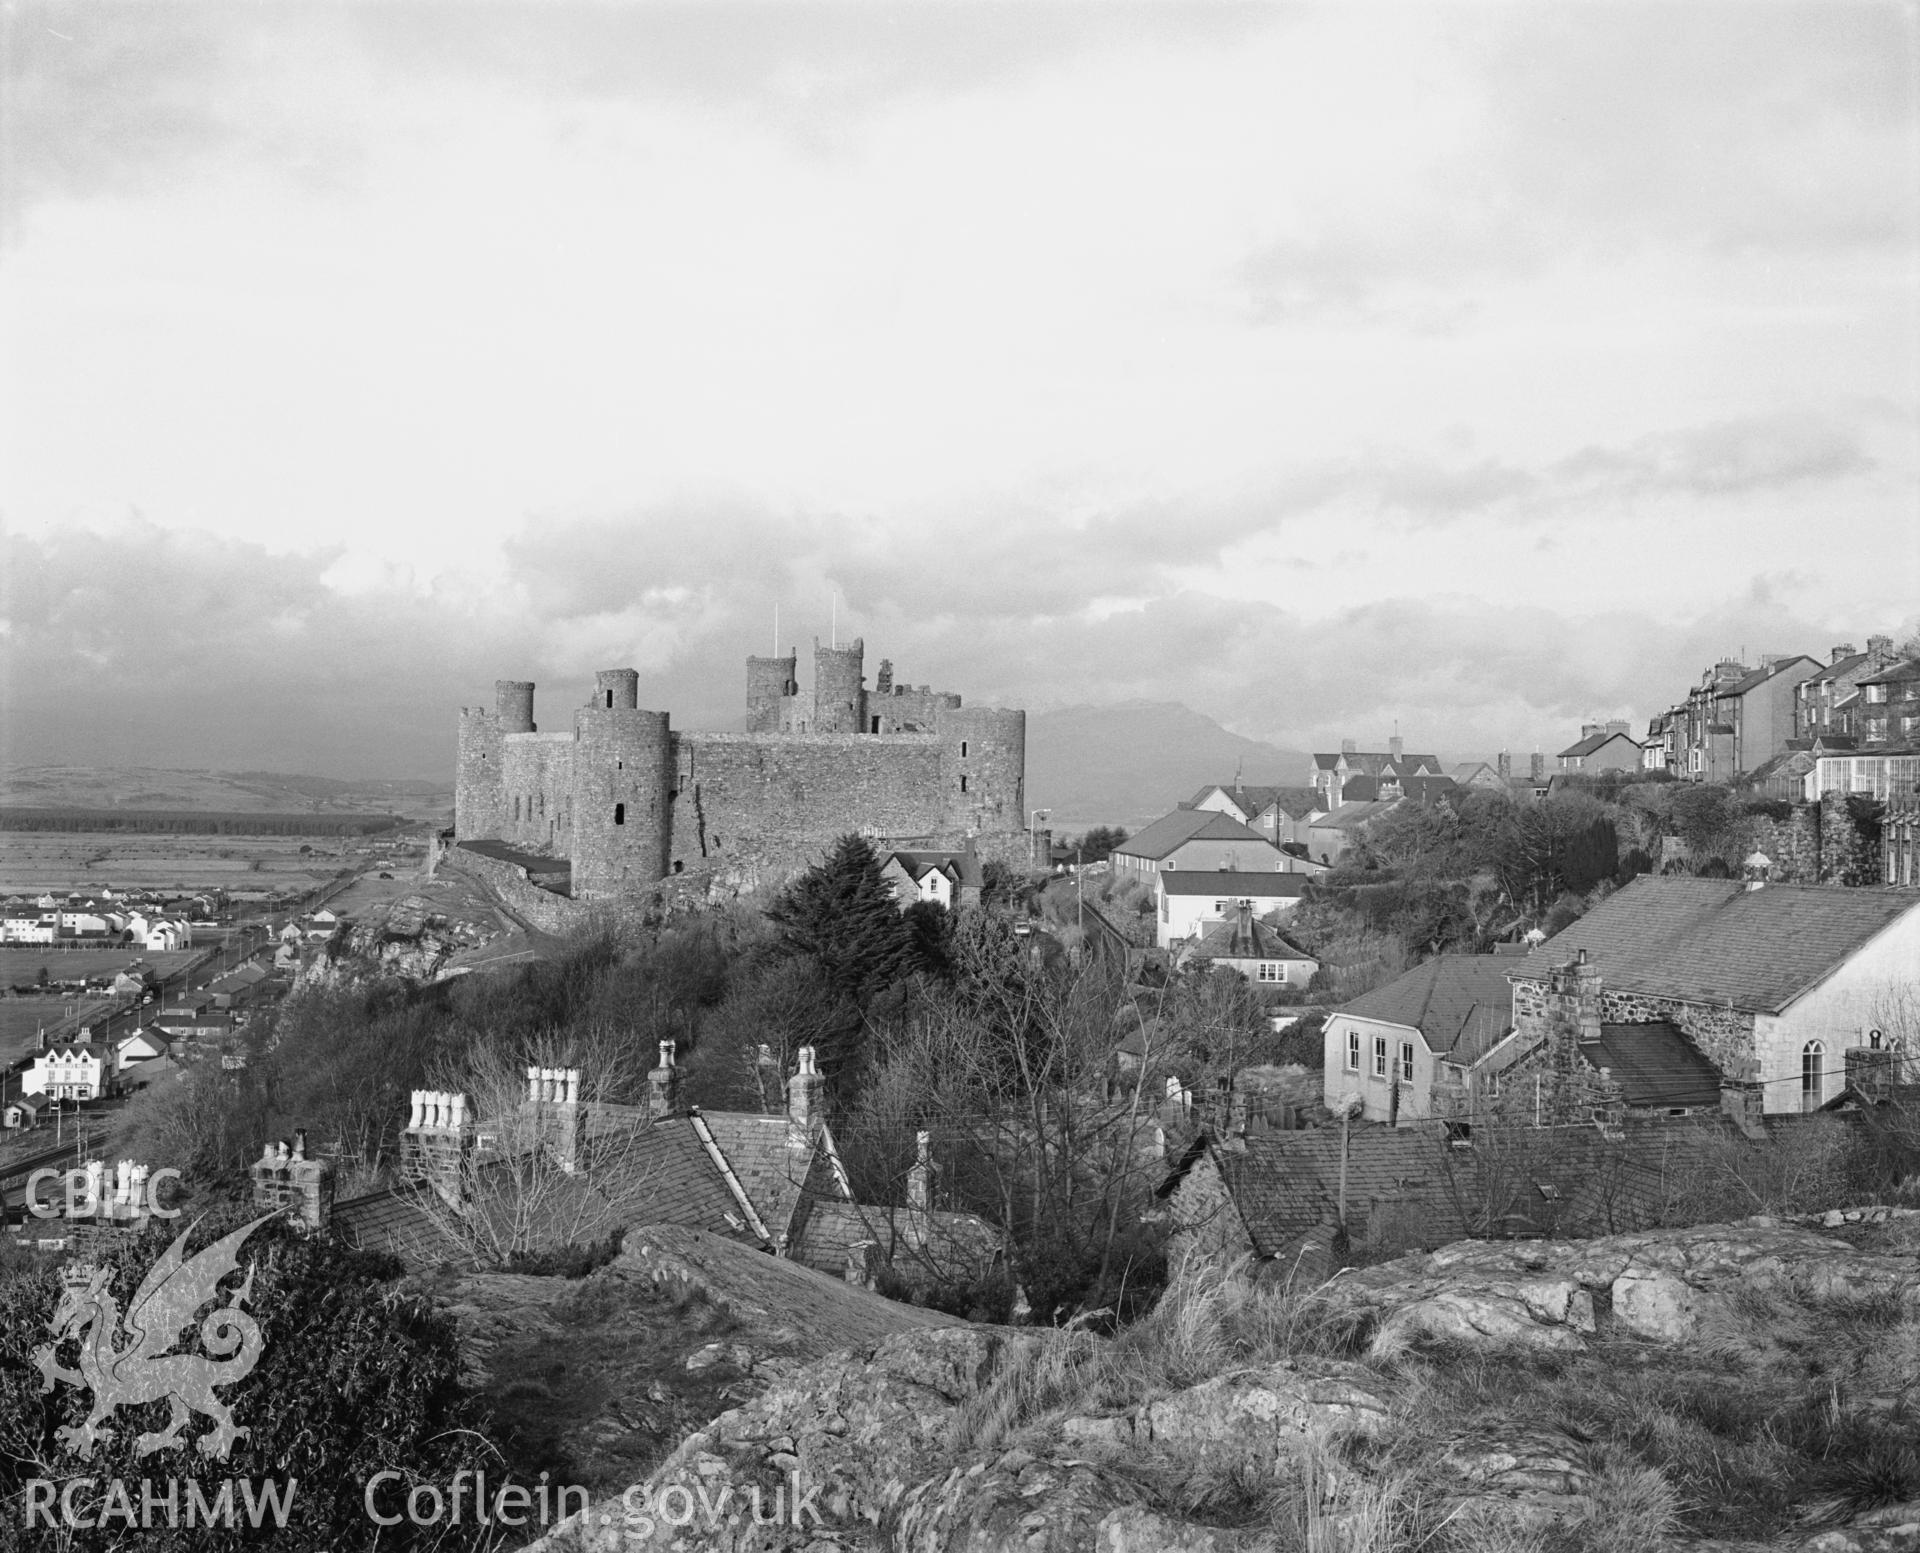 Photographic negative showing view of Harlech, including the castle; collated by the former Central Office of Information.